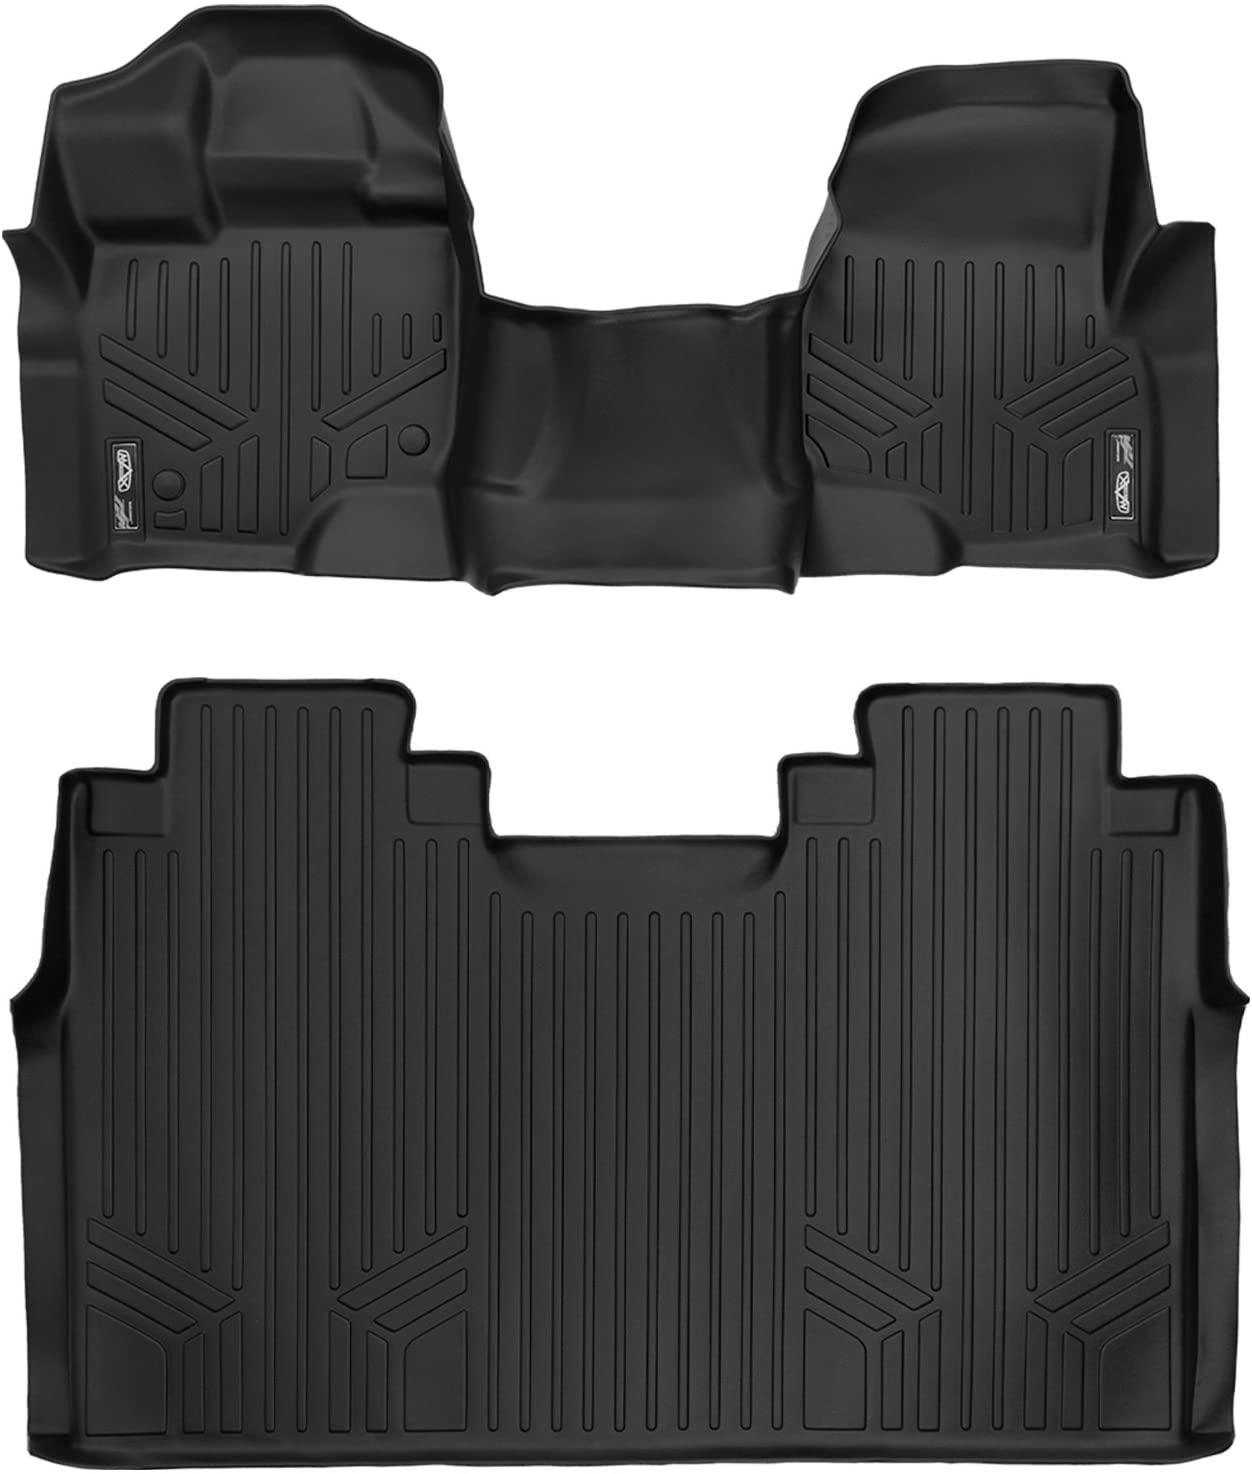 10 Best Floor Mats For Ford F150 Wonderful Engineering